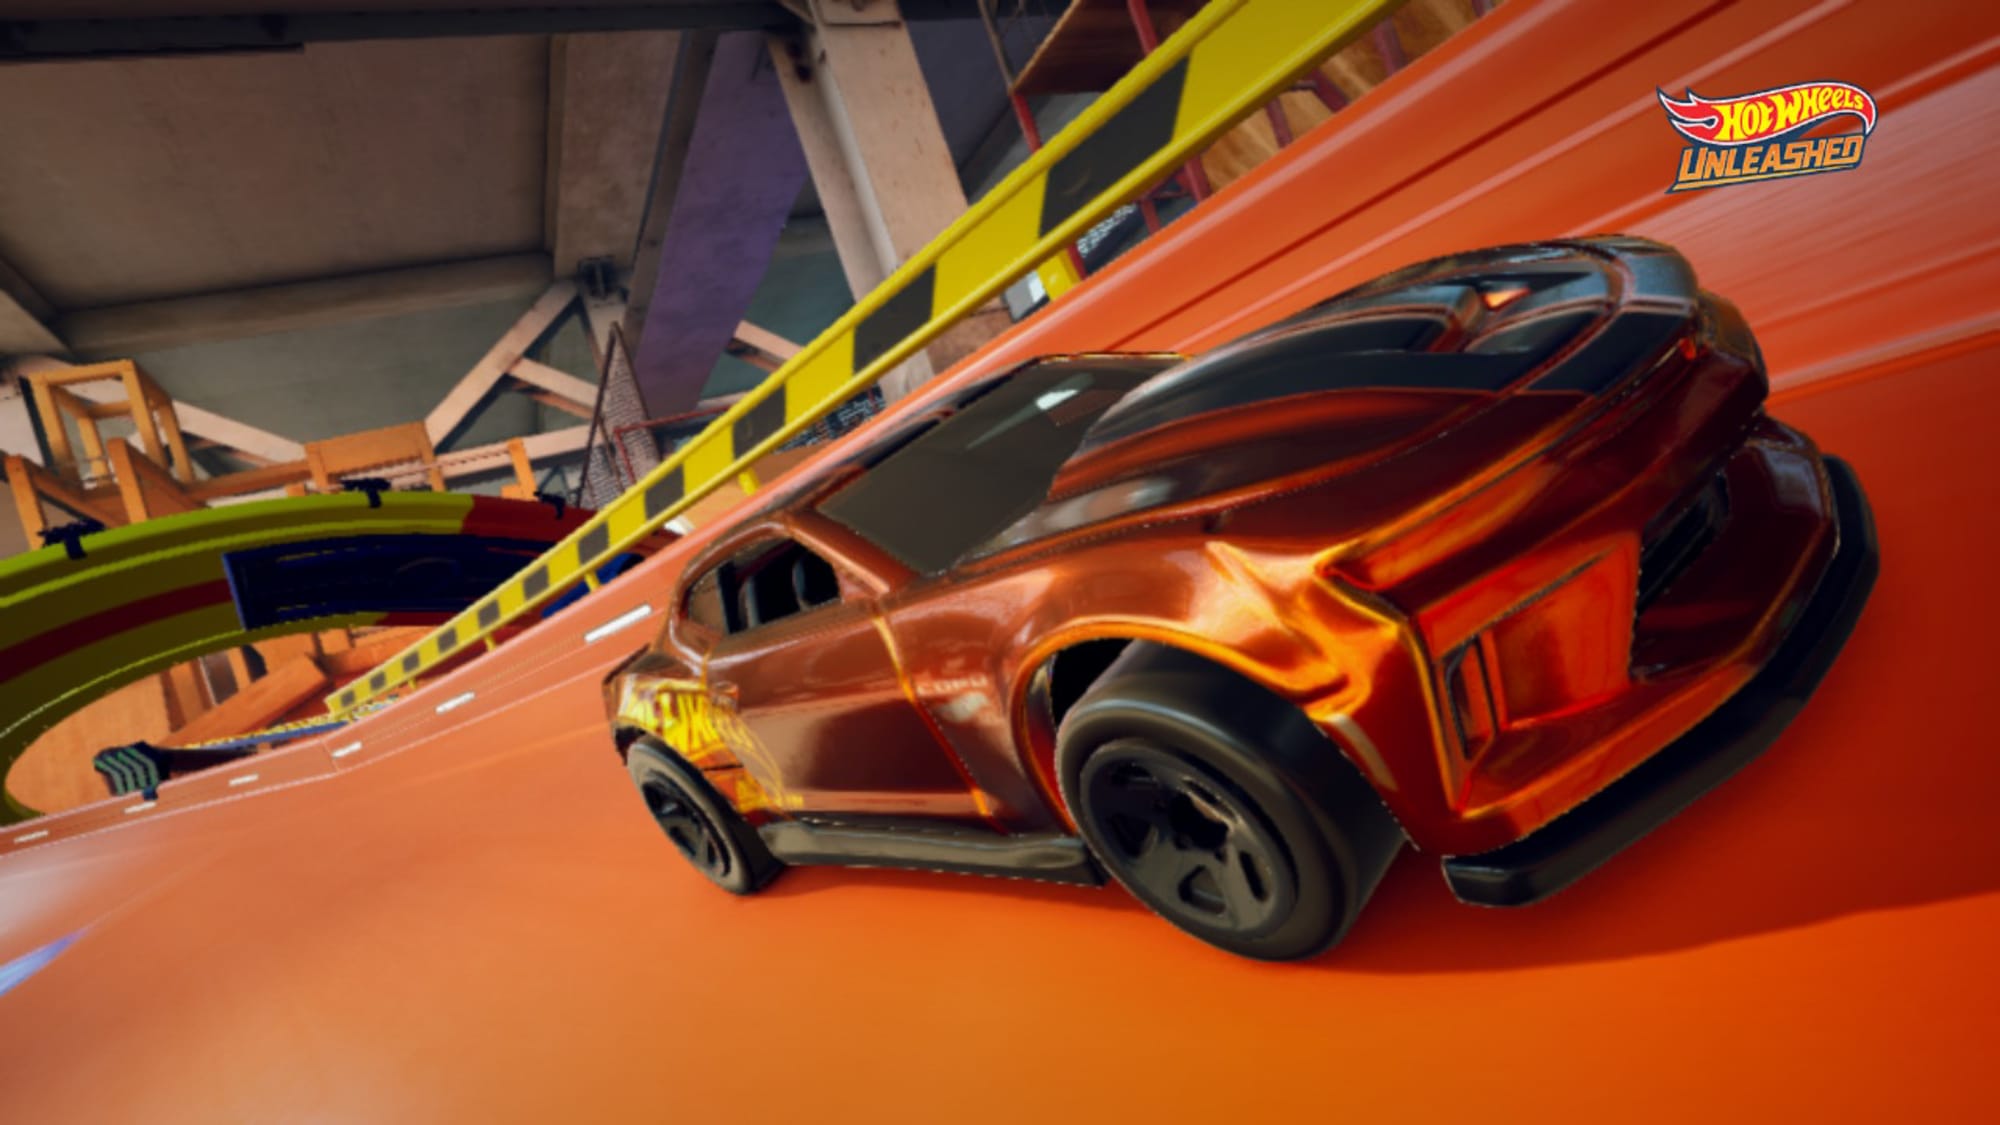 Hot Wheels Unleashed holds contest to design real-life Hot Wheels car